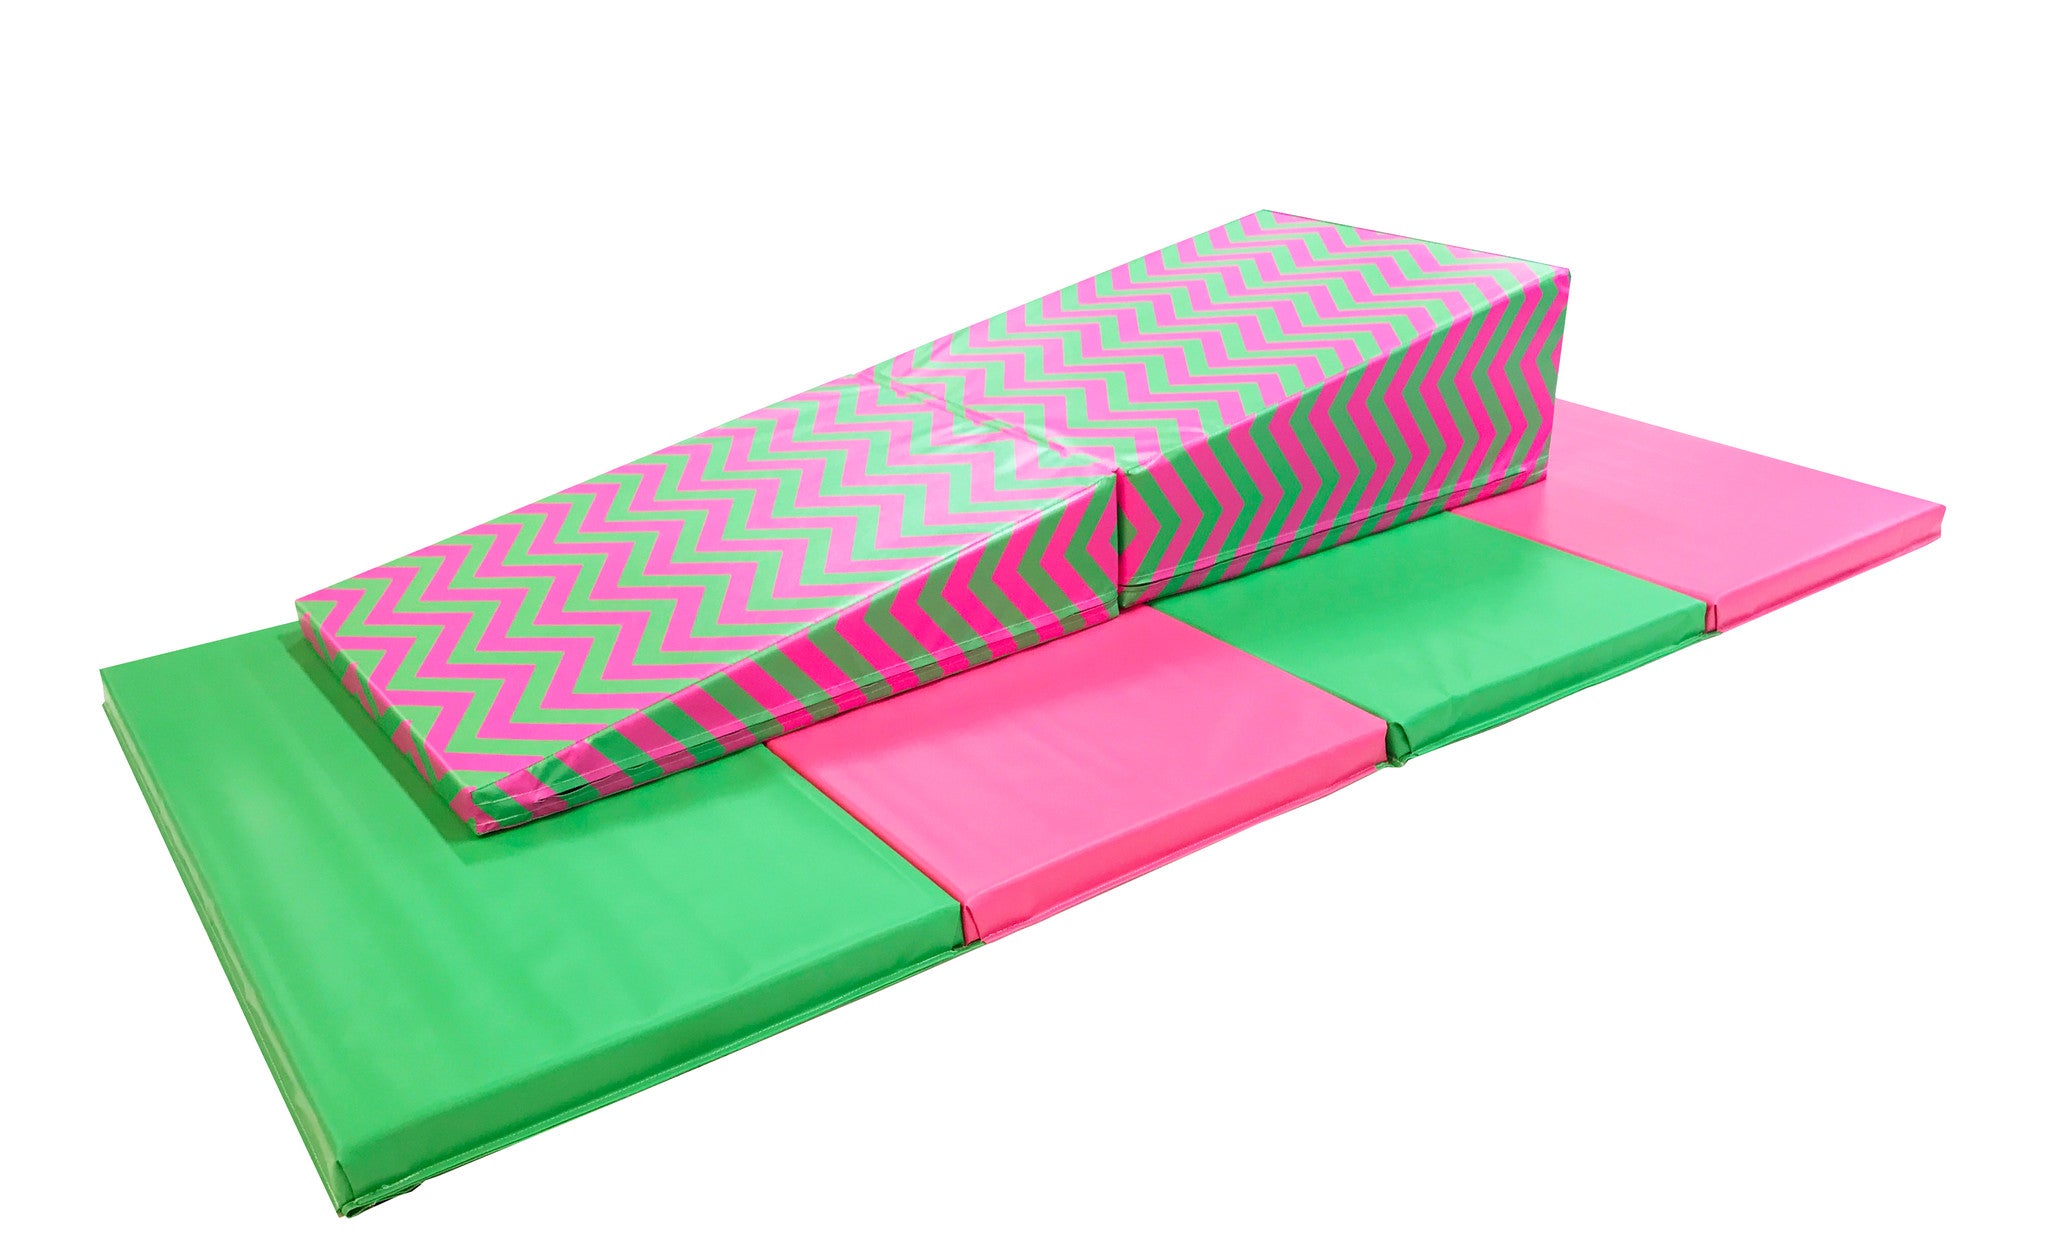 4' x 8' x 2" Pink and Green Gymnastics Folding Mat and Pink Green Chevron Incline Combo